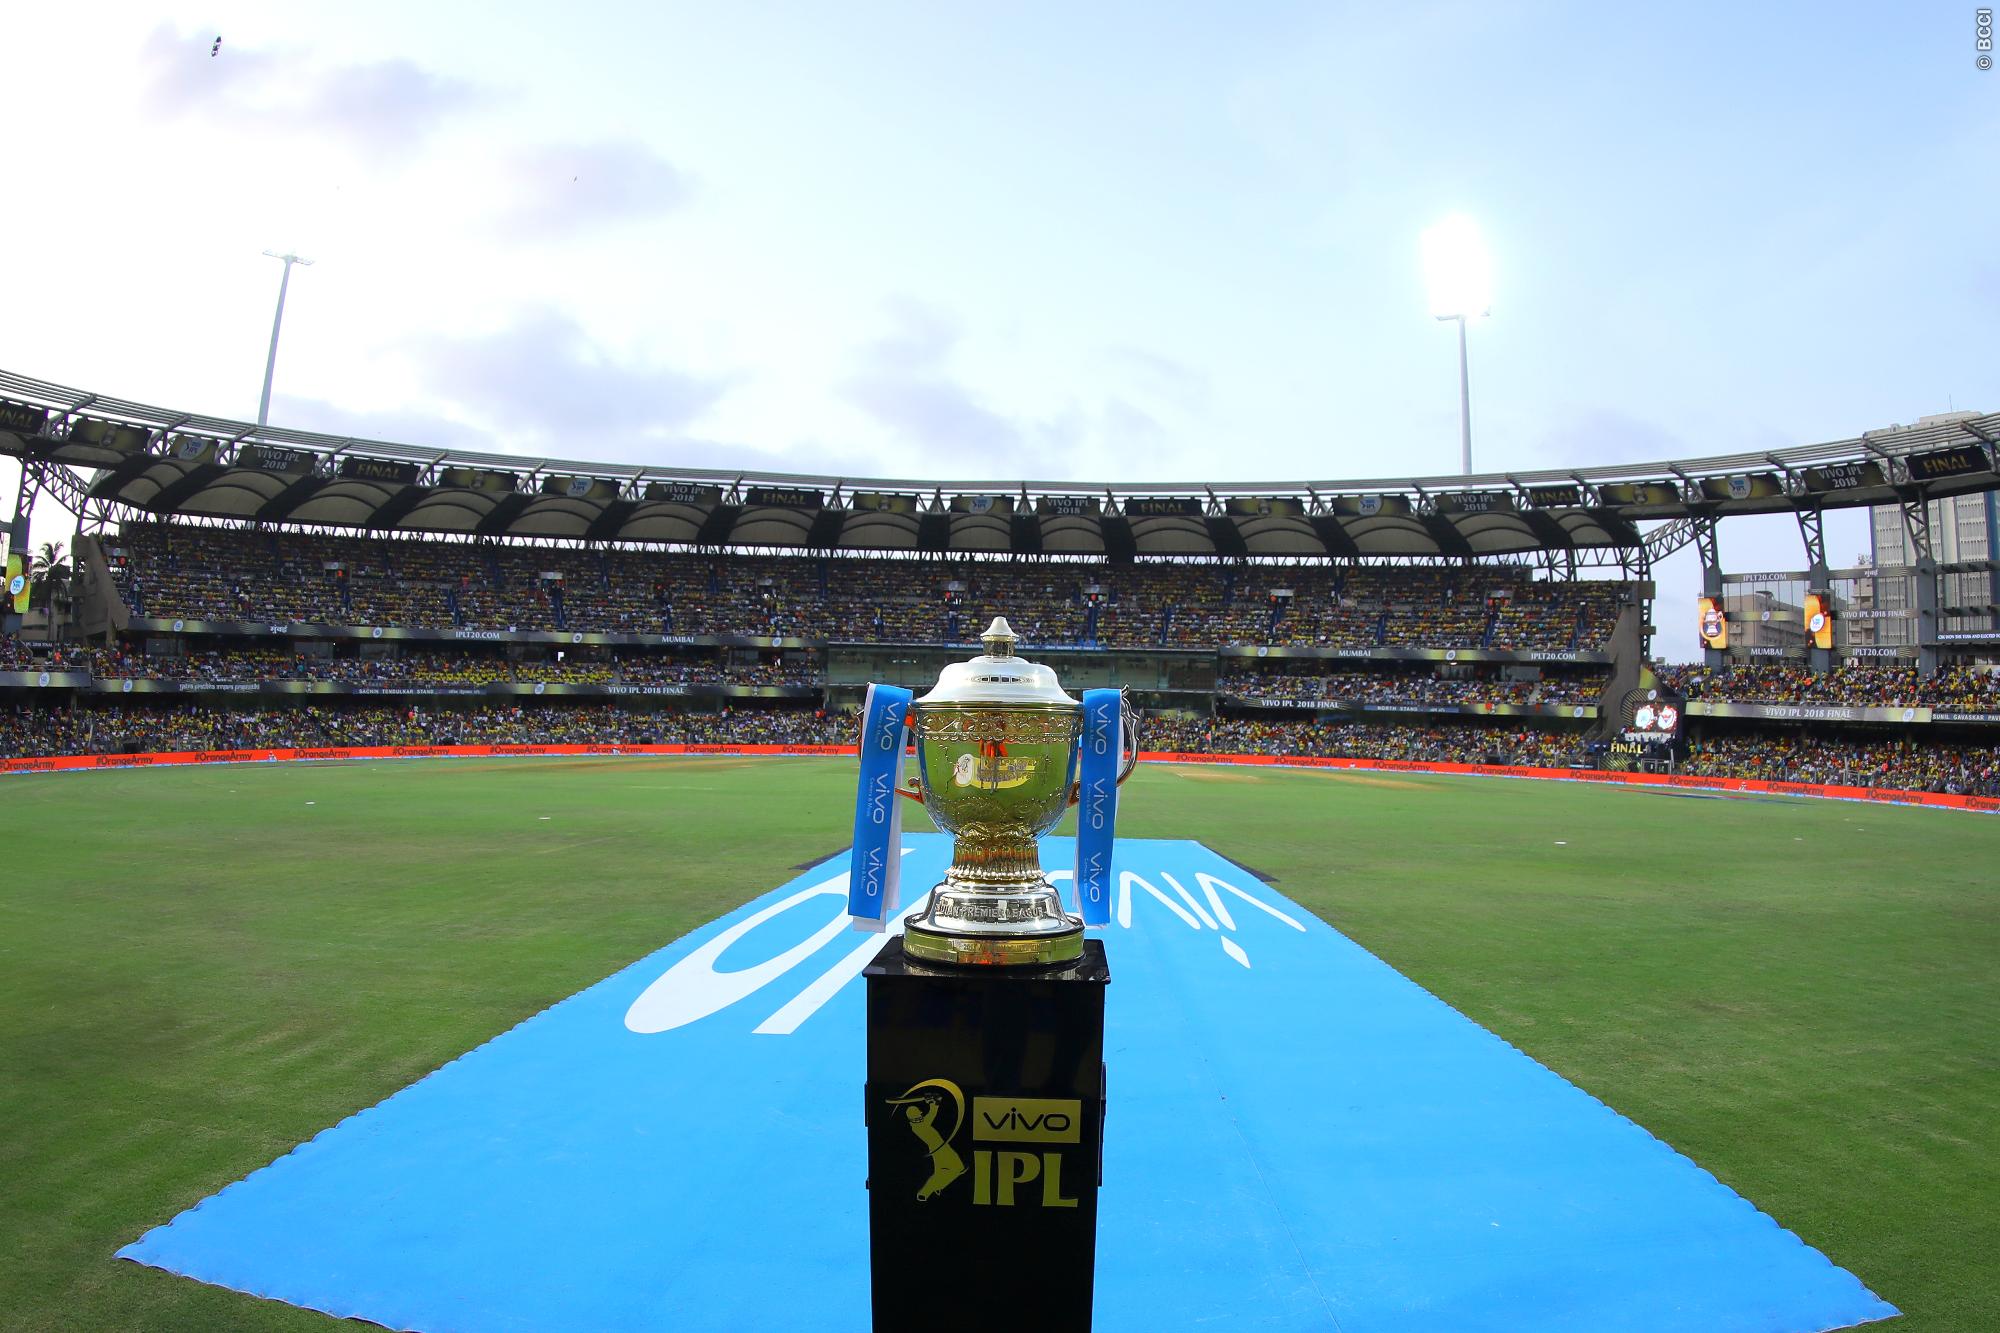 Are you ready for the IPL 12